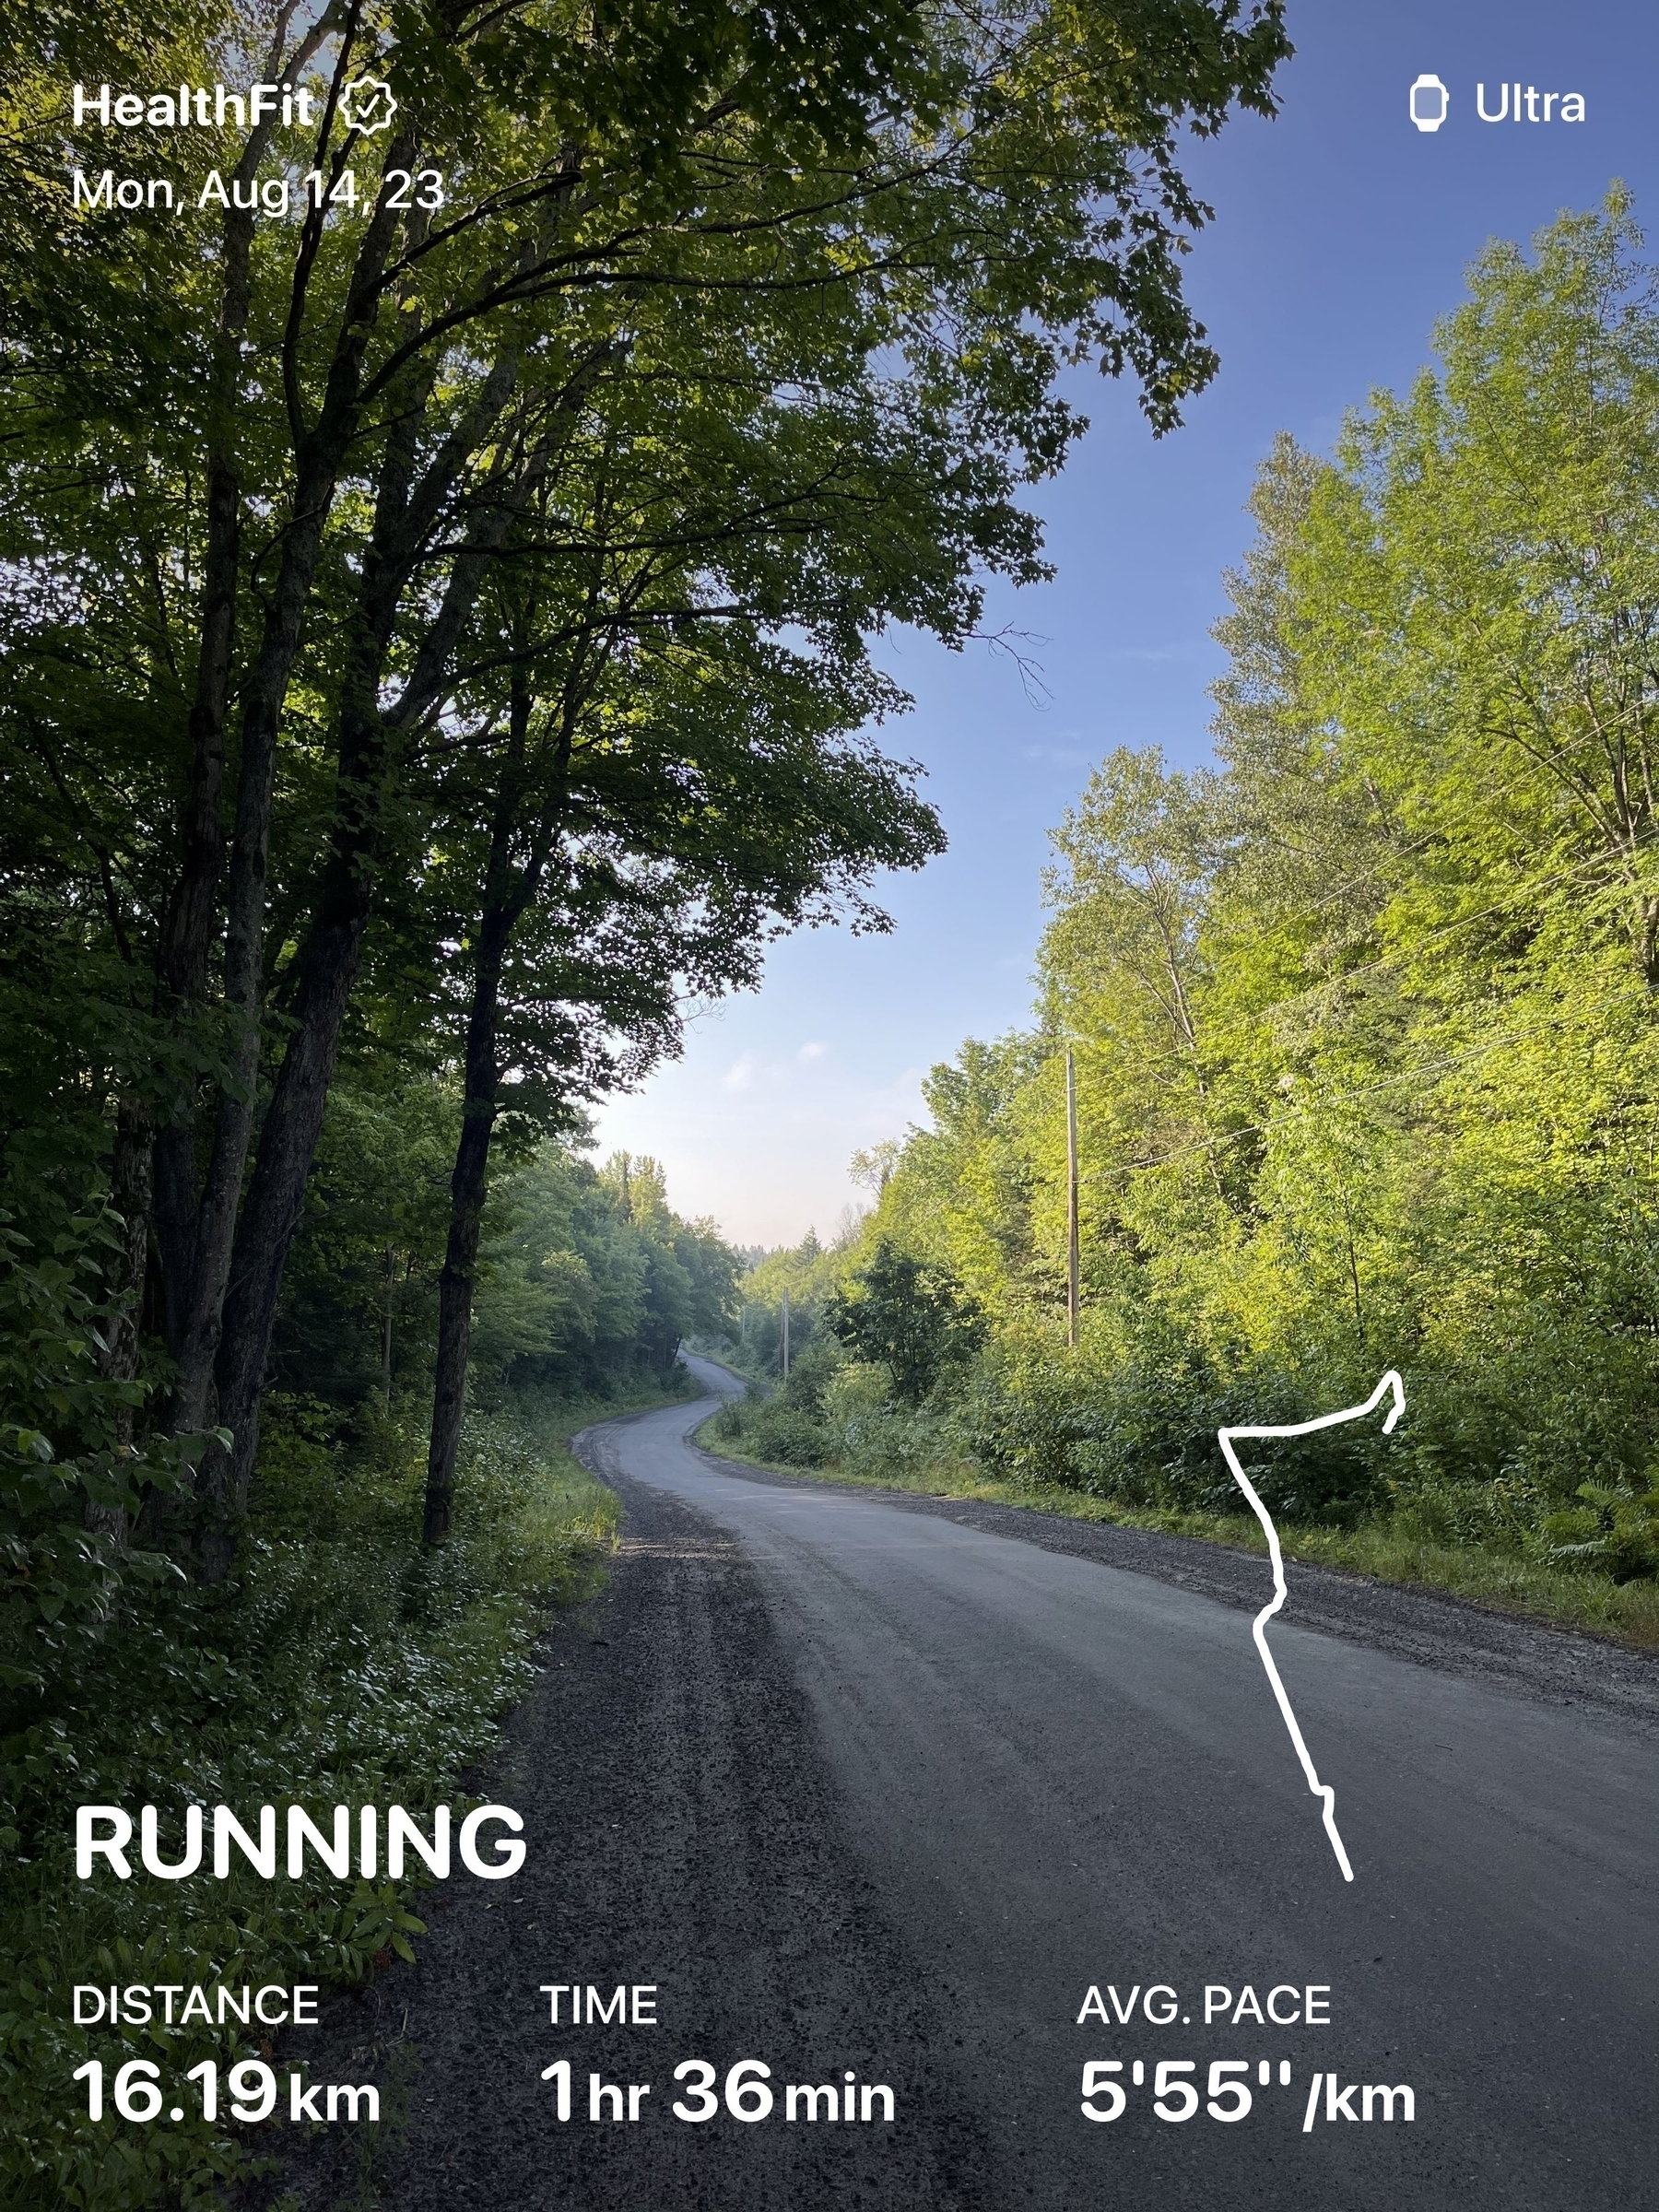 Gravel road winding through a forest with running stats overlaid: 16km 1hr35m